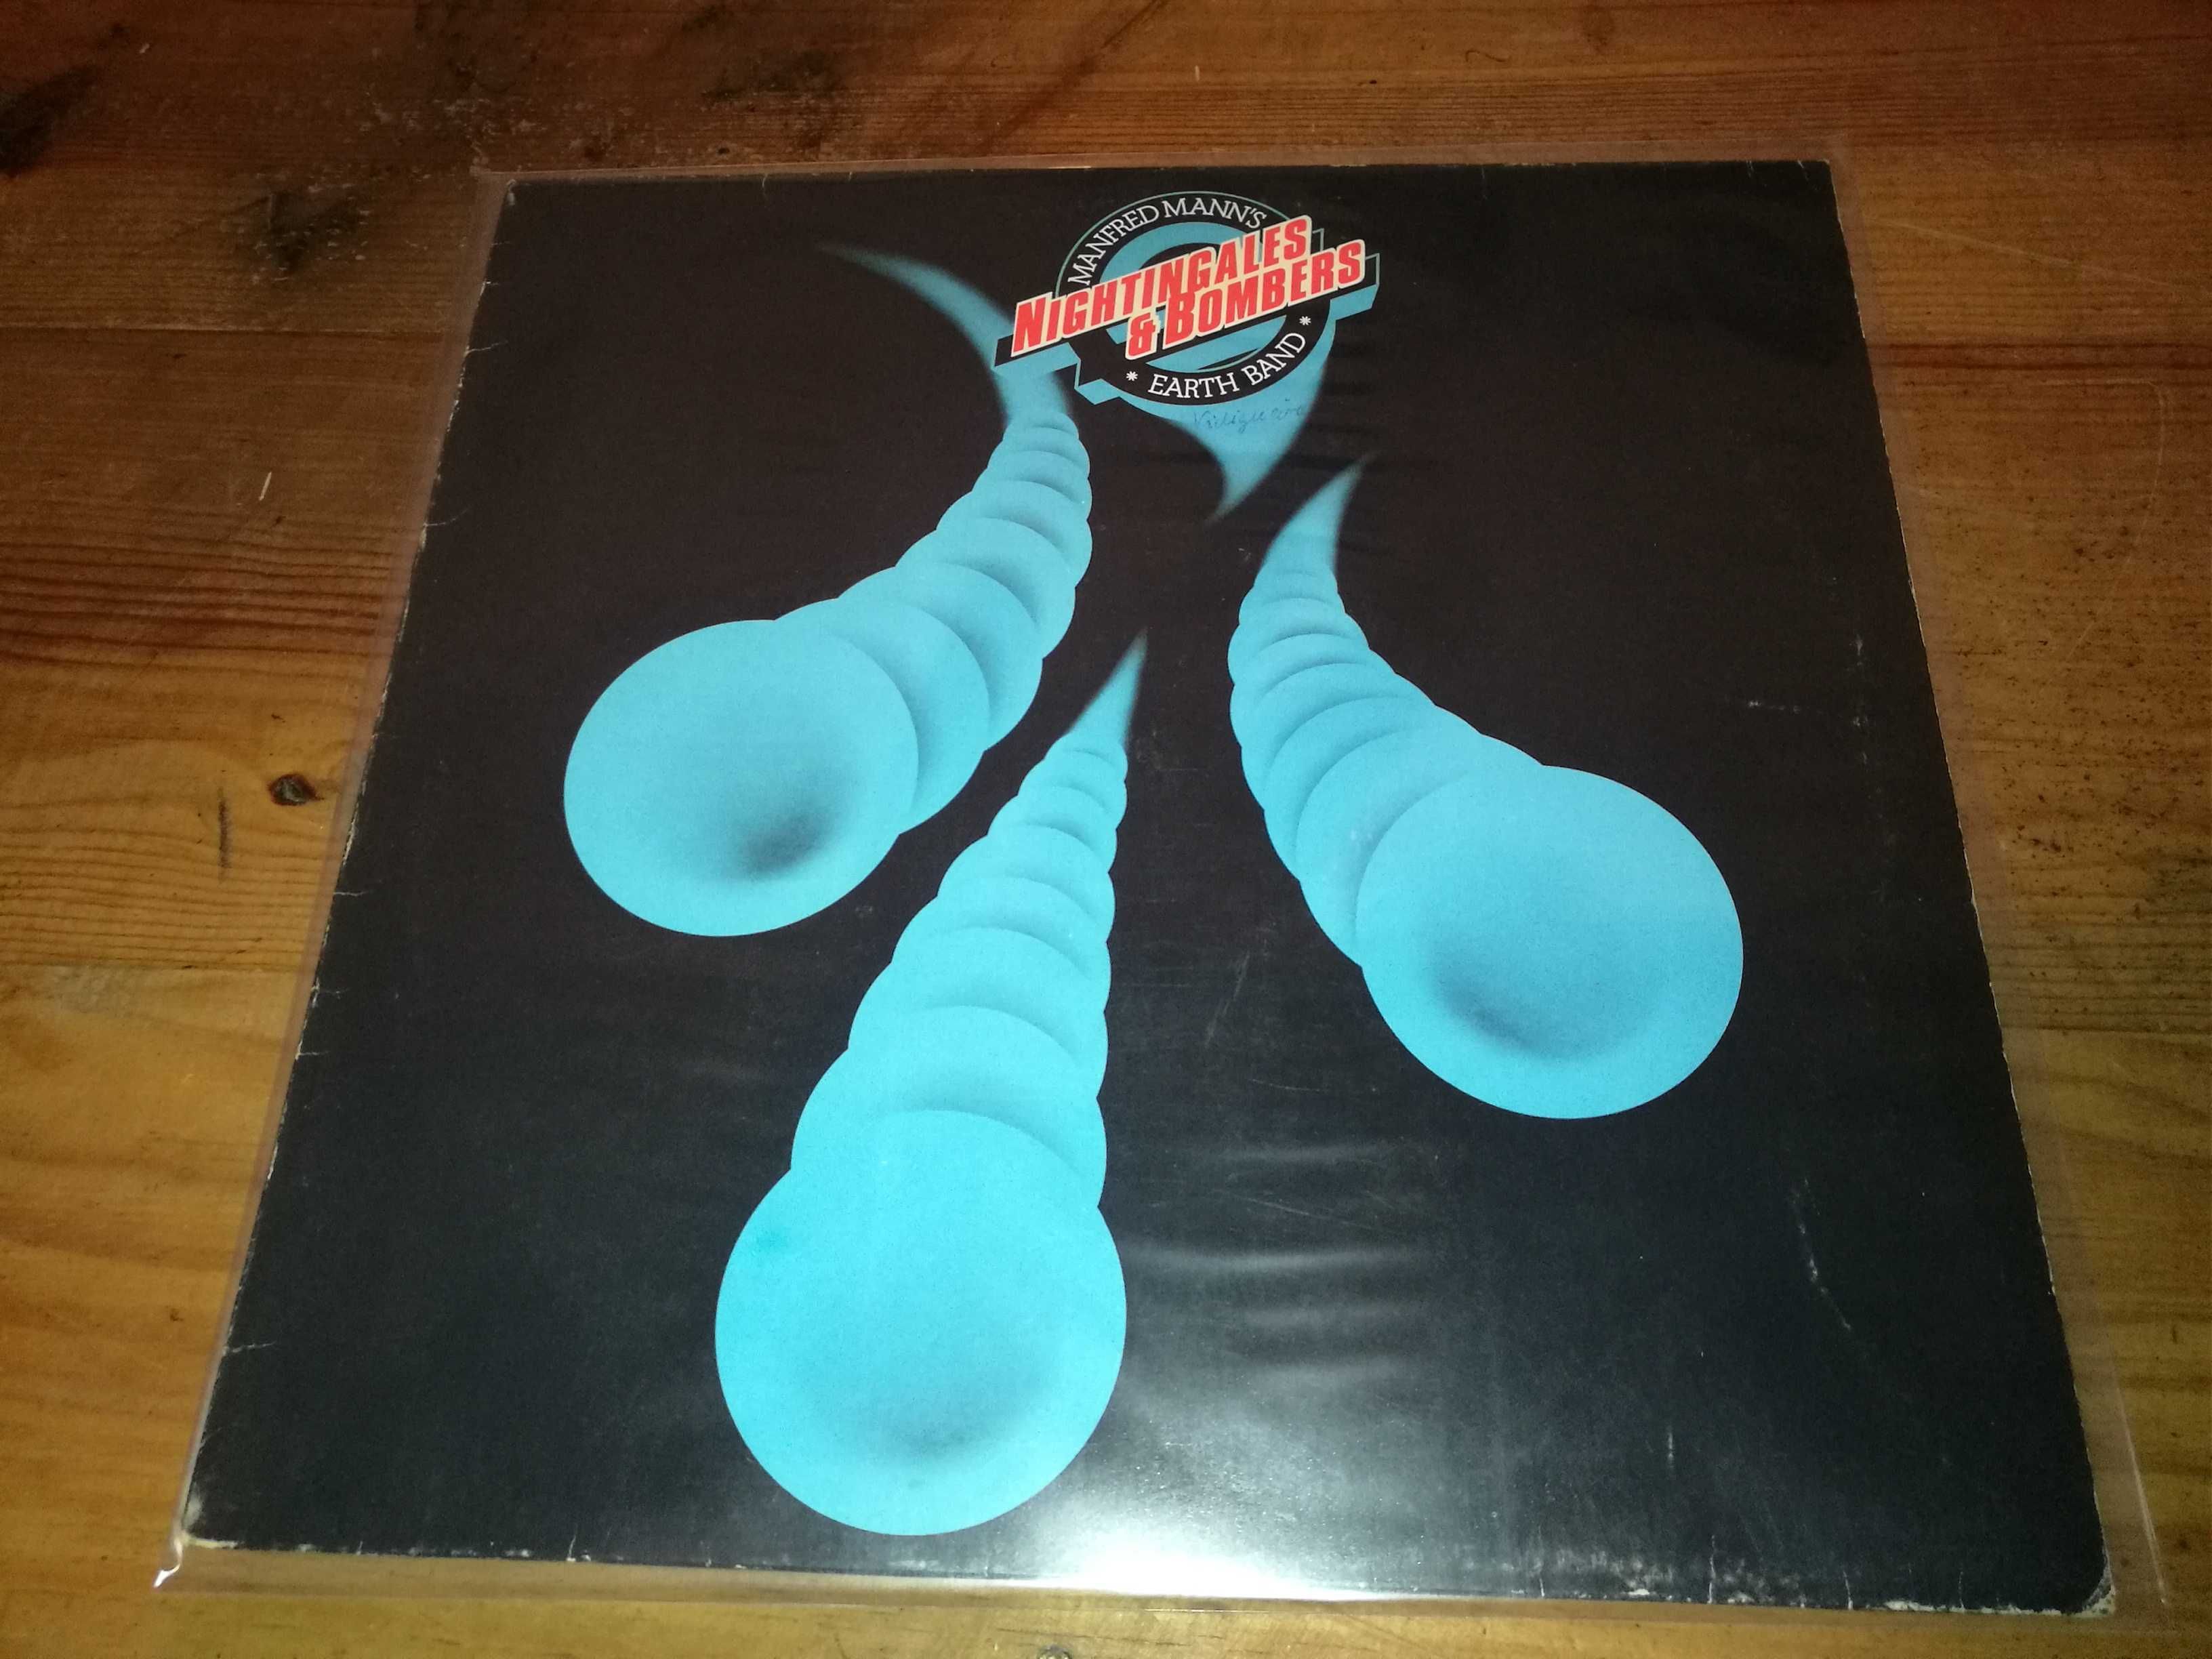 MANFRED MANN'S EARTH BAND(Prog Rock)-Nightingale and bombers LP